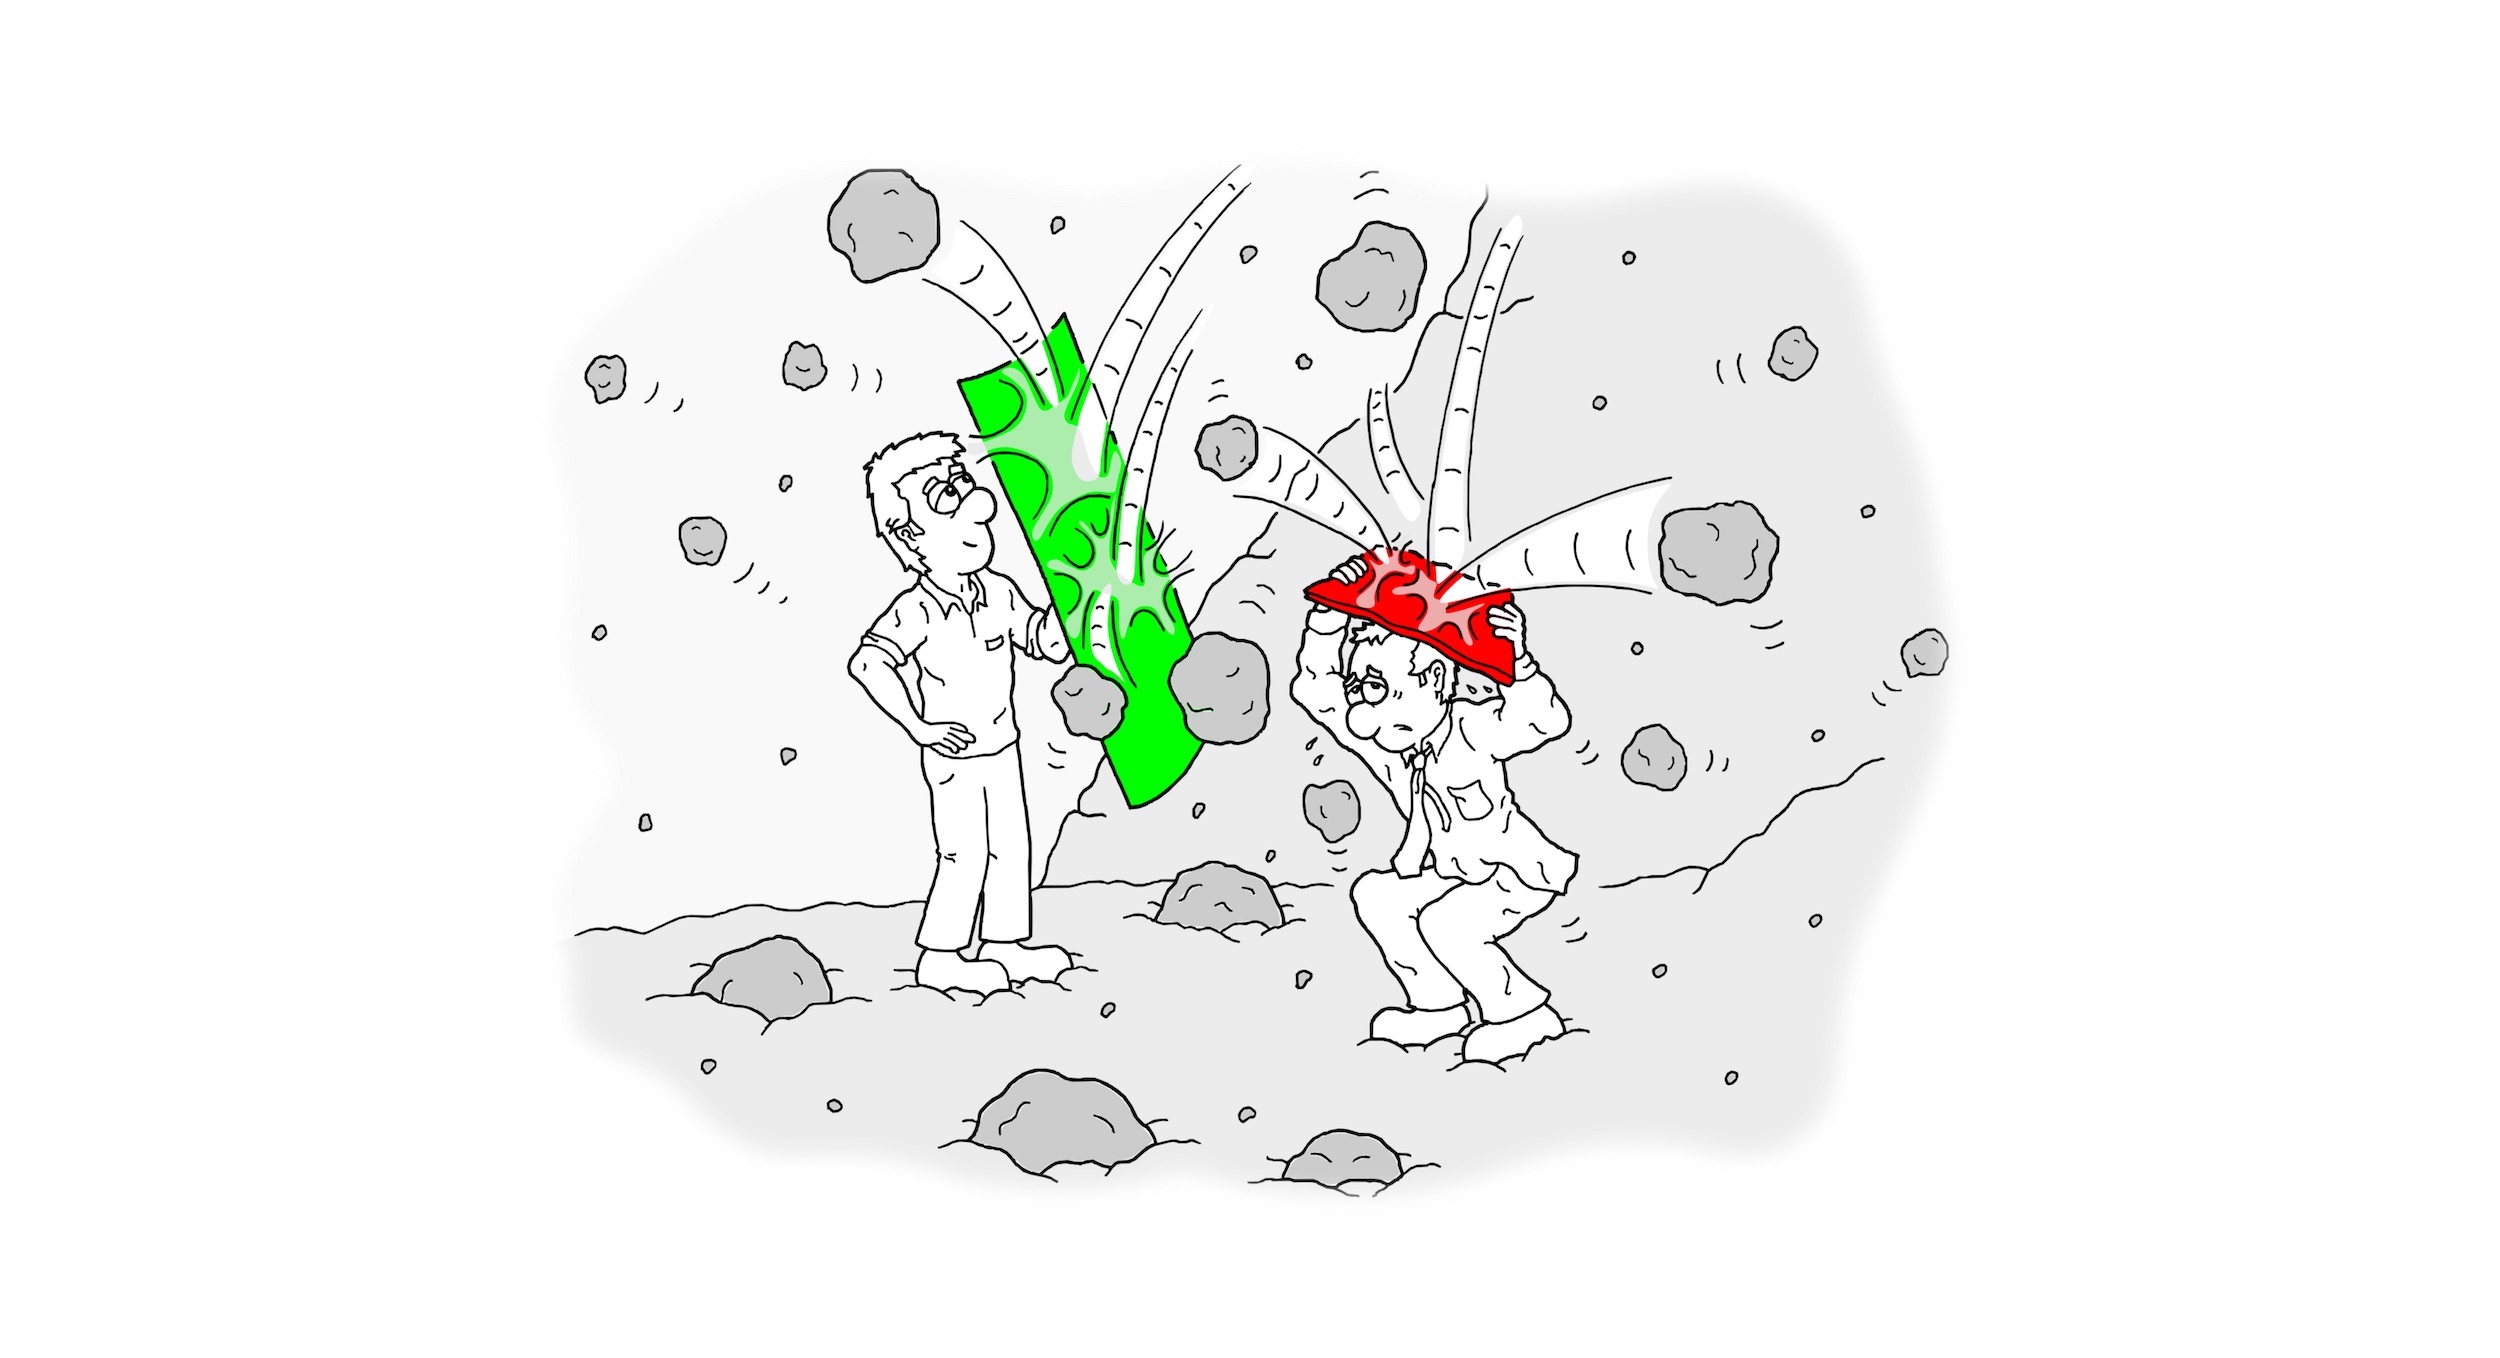 person holding a green shield to protect himself from stones while other person with red shield struggles to shield himself.